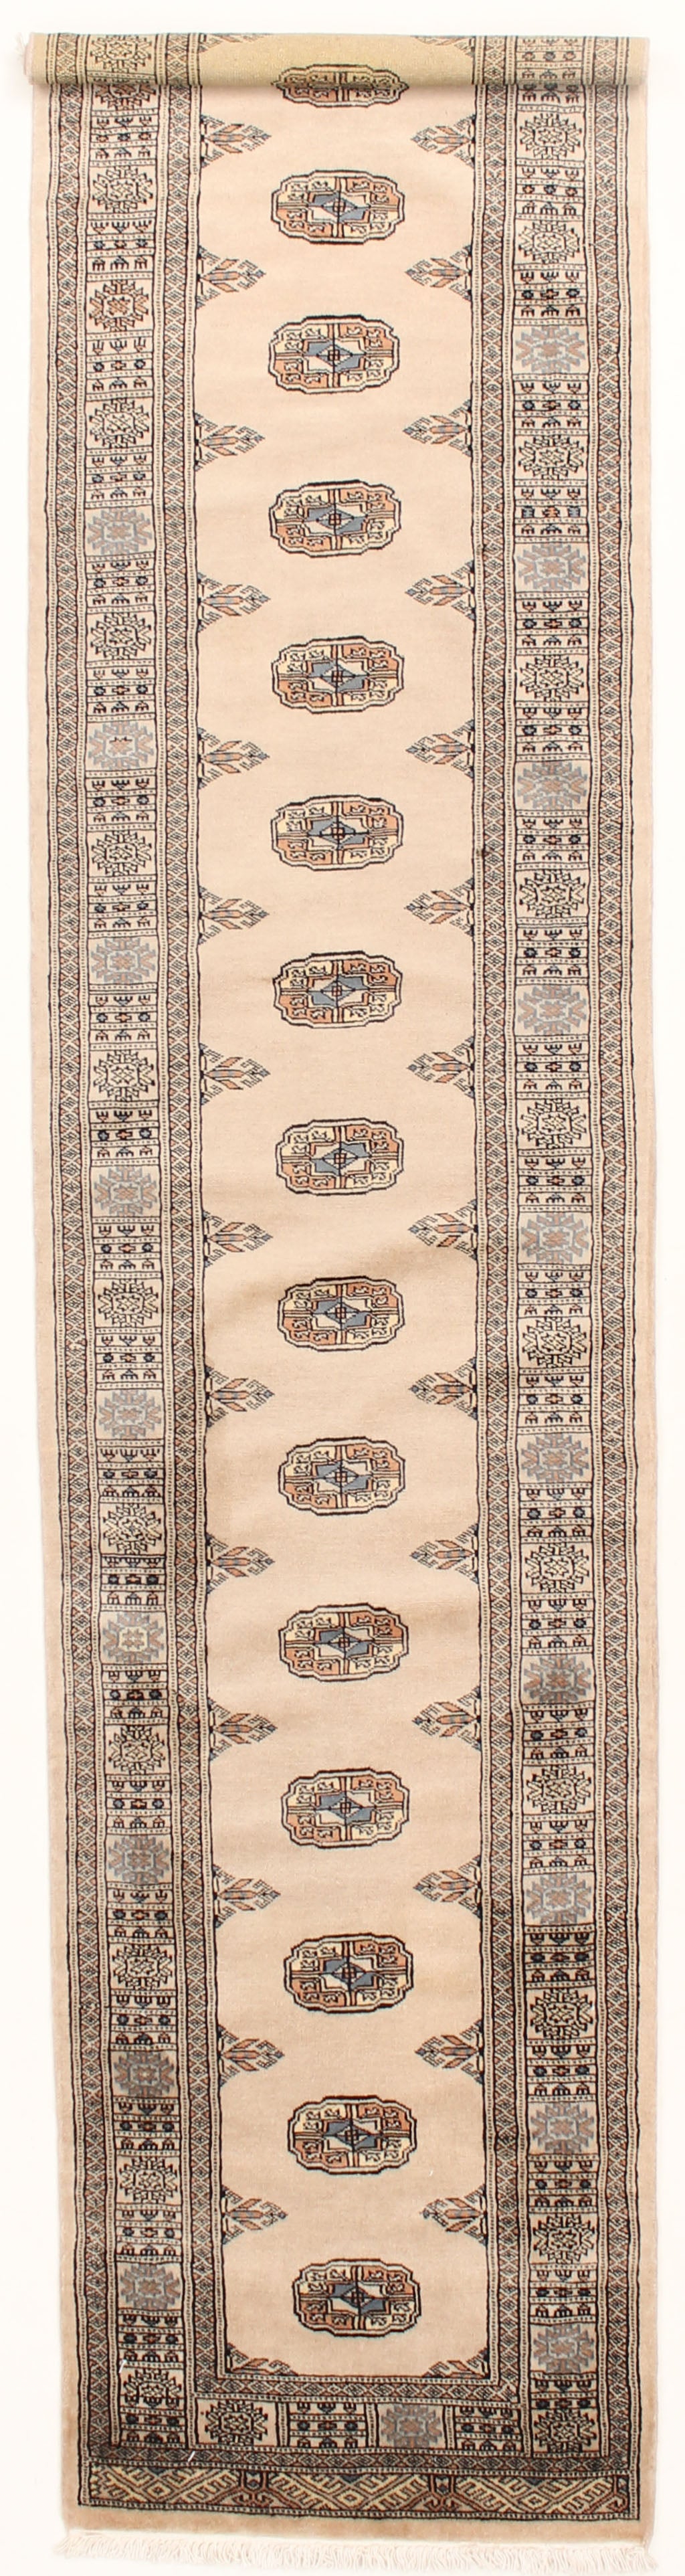 blue oriental runner with traditional gul pattern